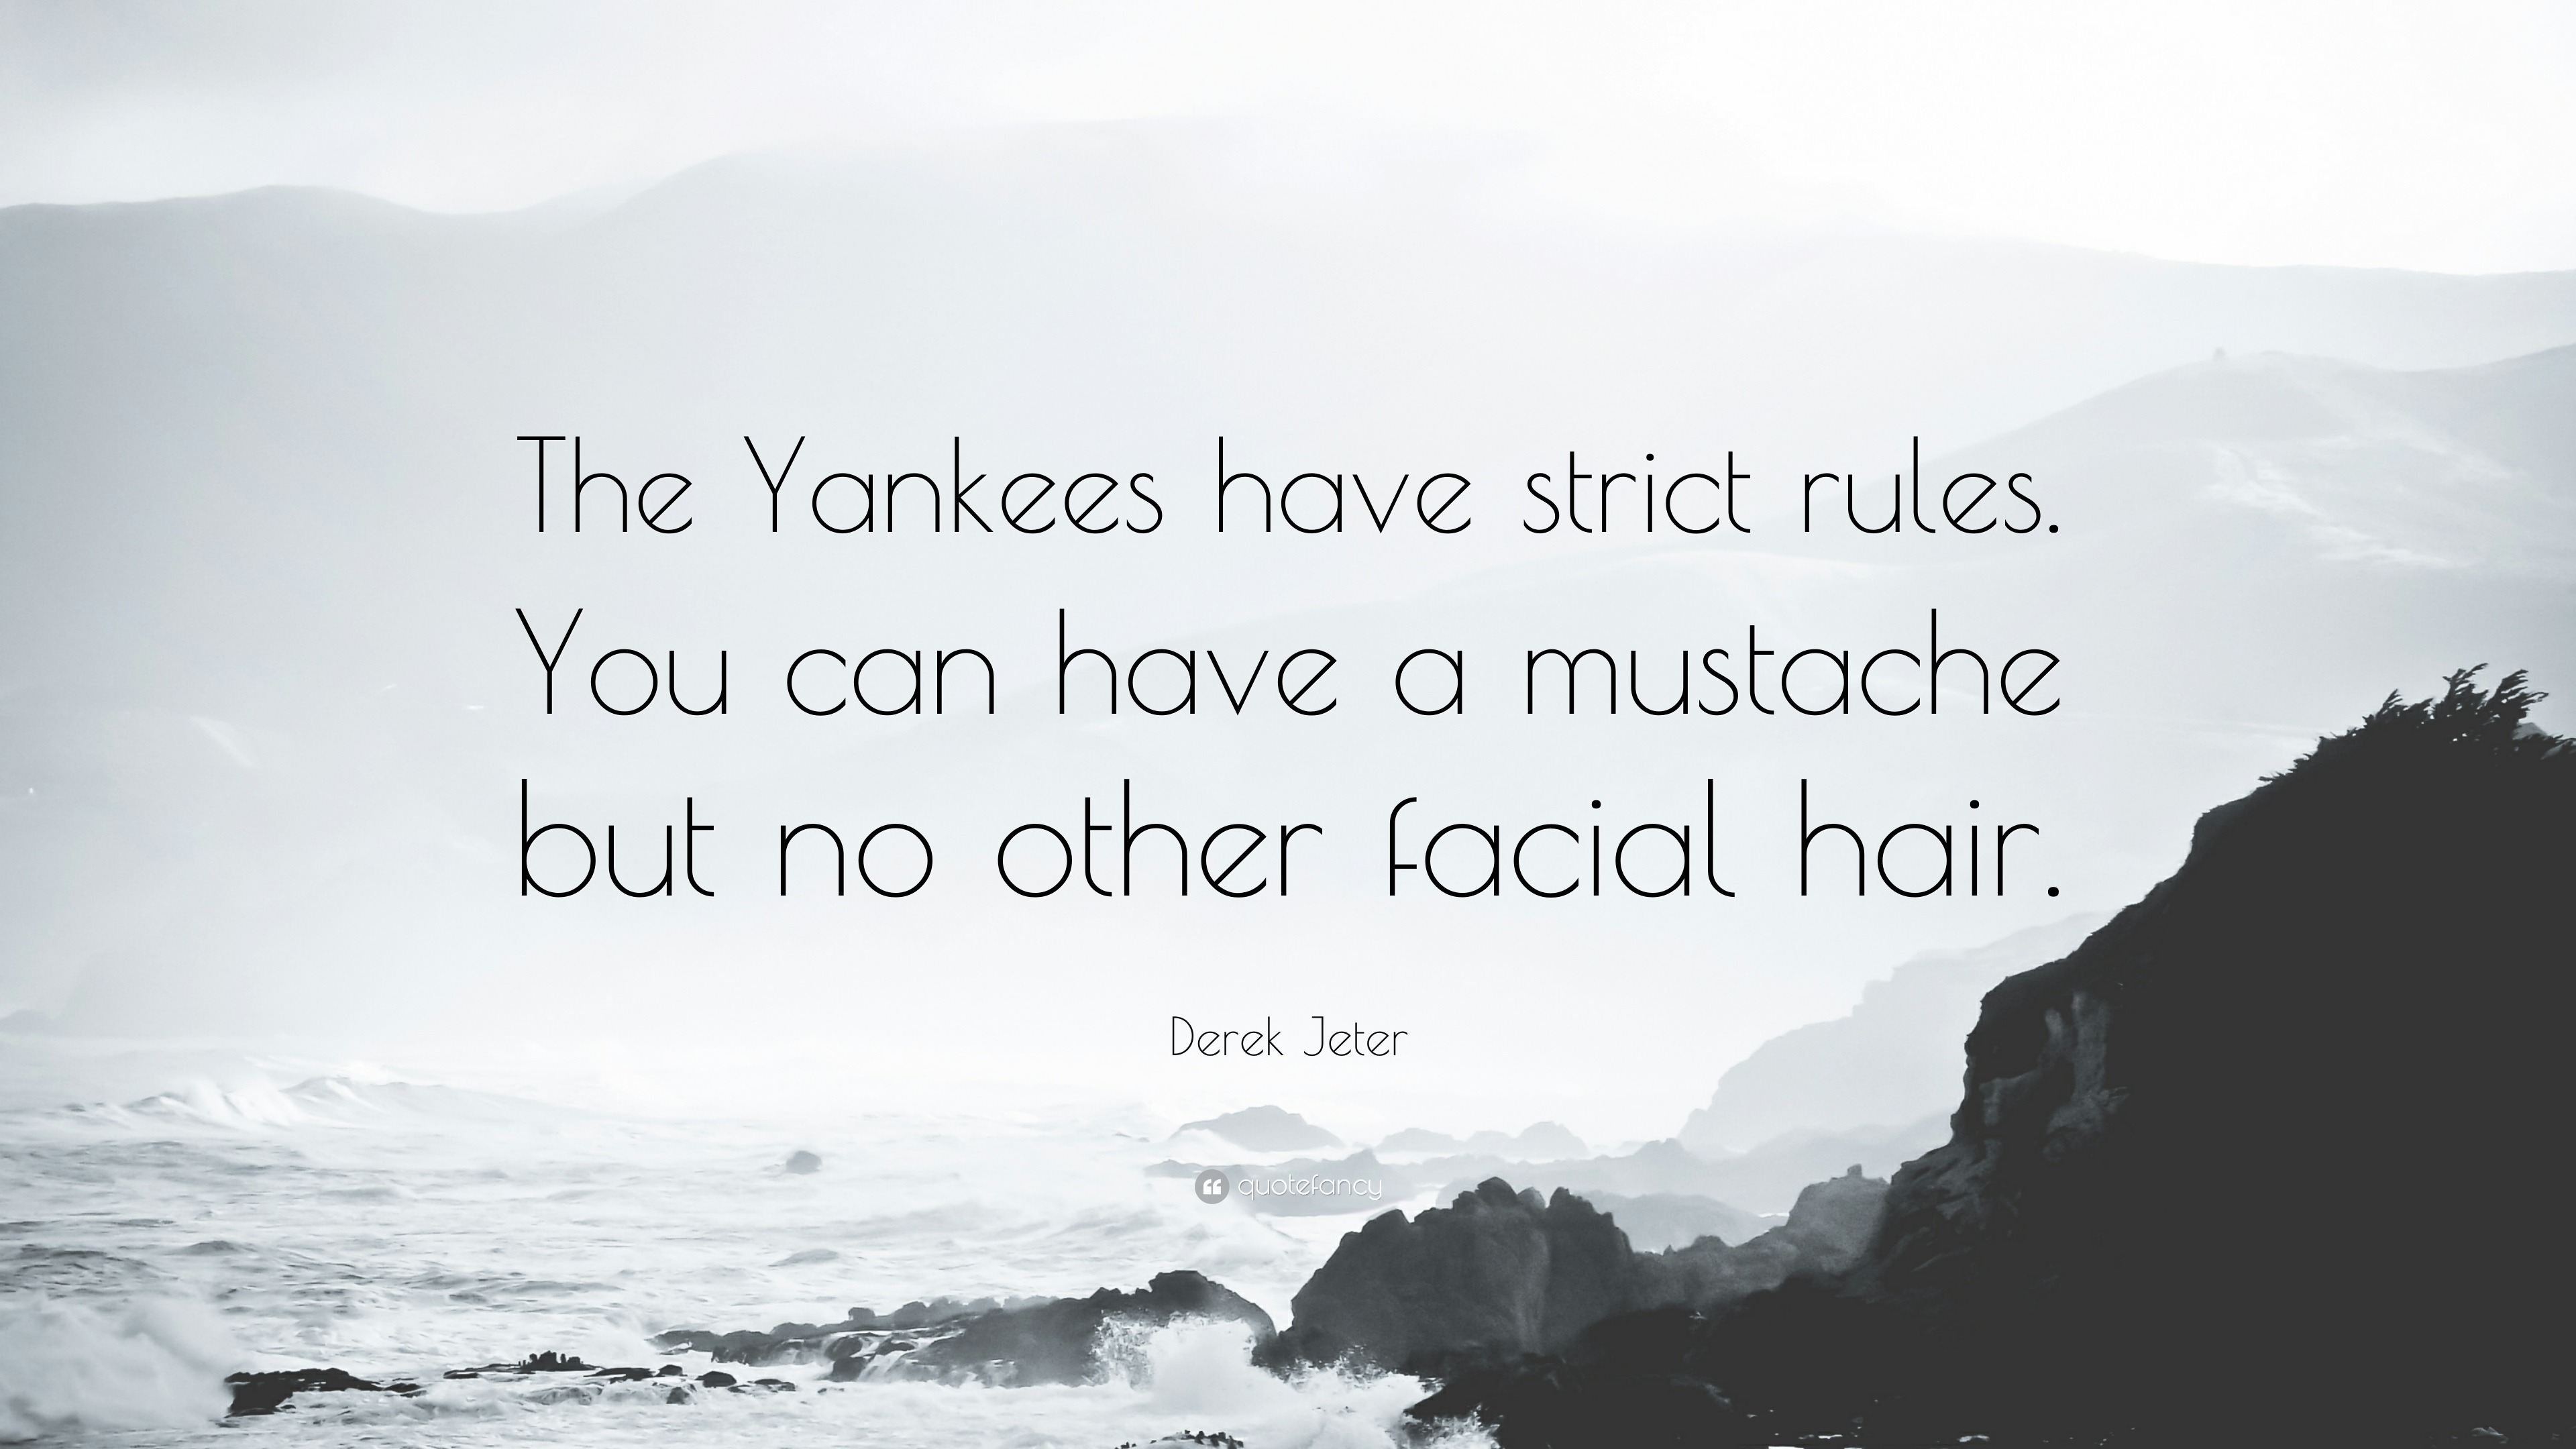 Oh, those Yankee mustaches